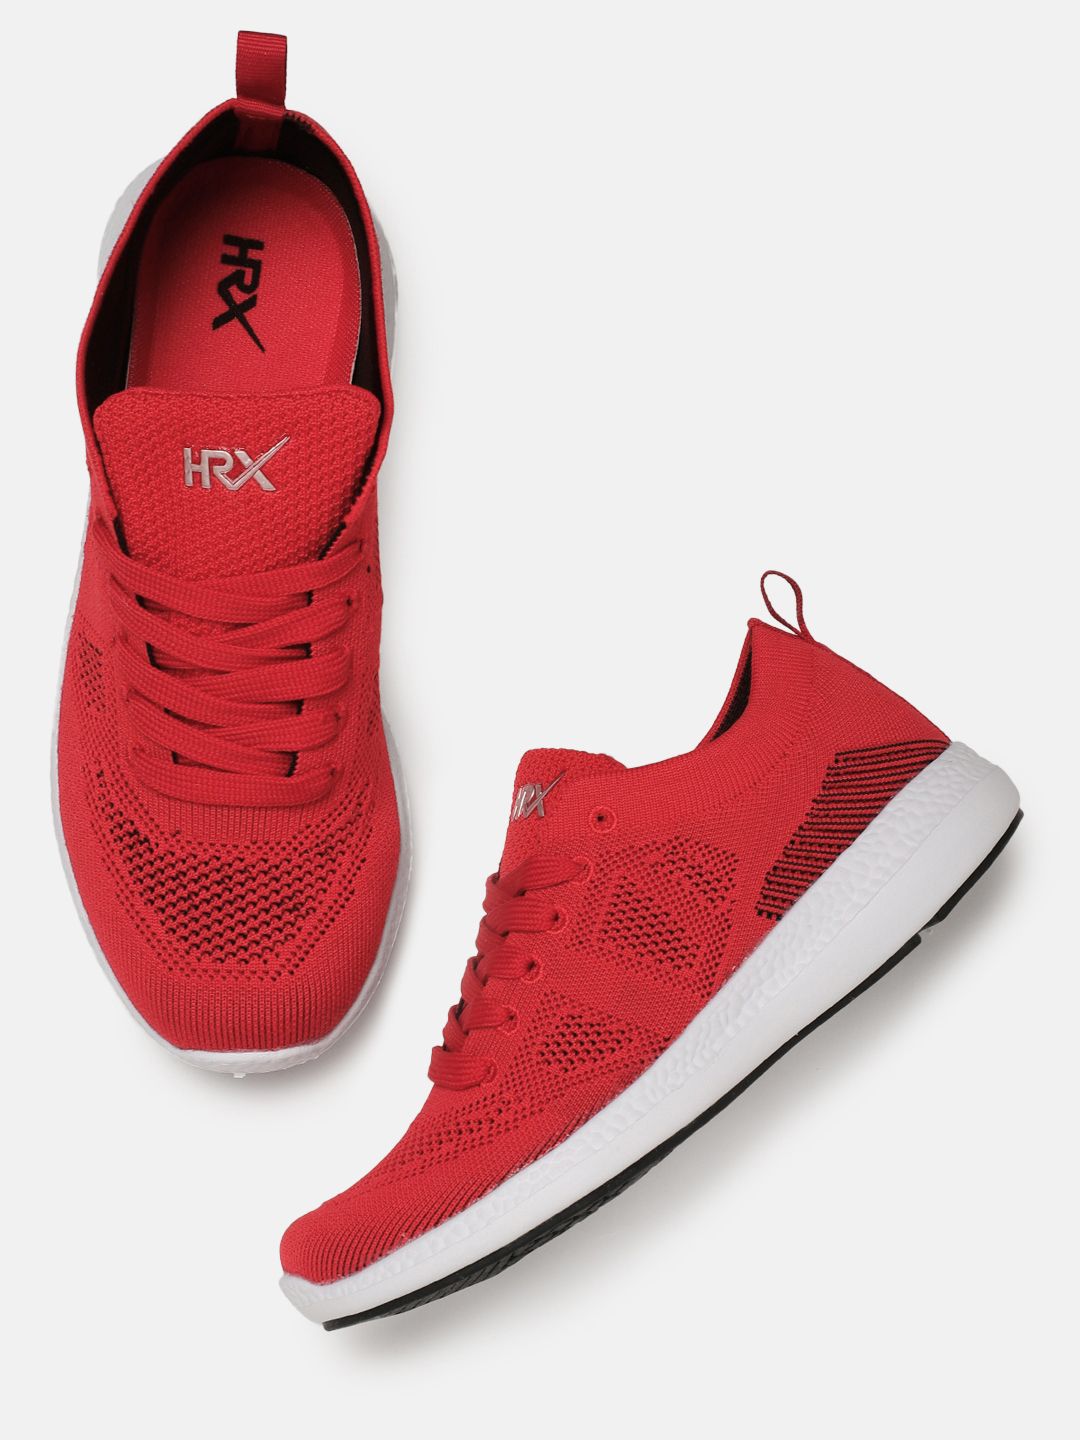 HRX by Hrithik Roshan Women Red Ultra Knit Series Running Shoes Price in India